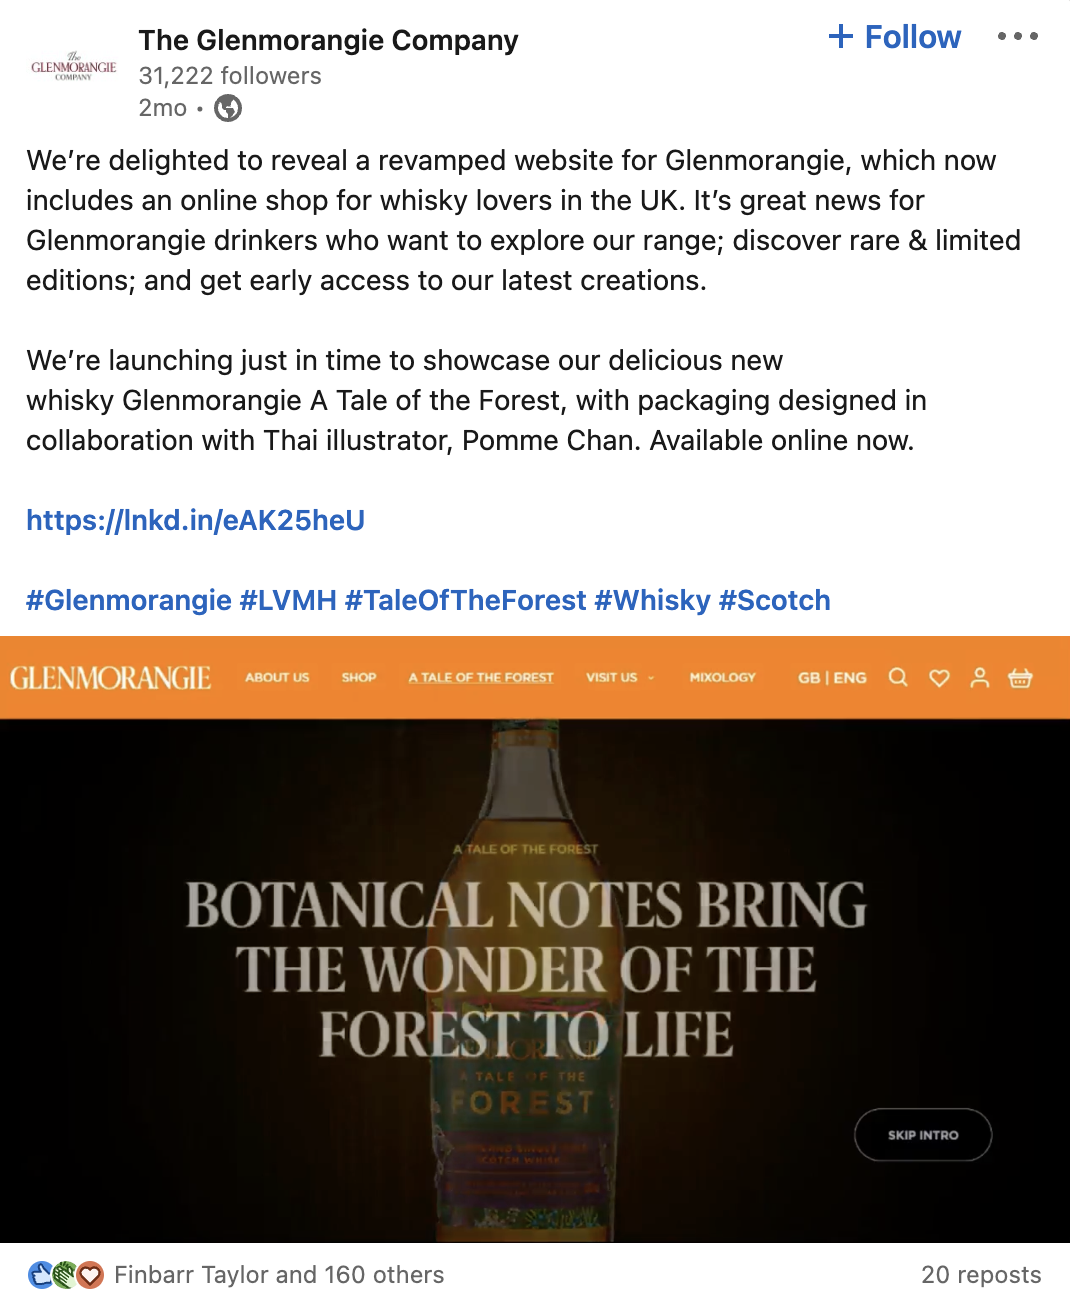 Screenshot of a Facebook post from The Glenmorangie Company